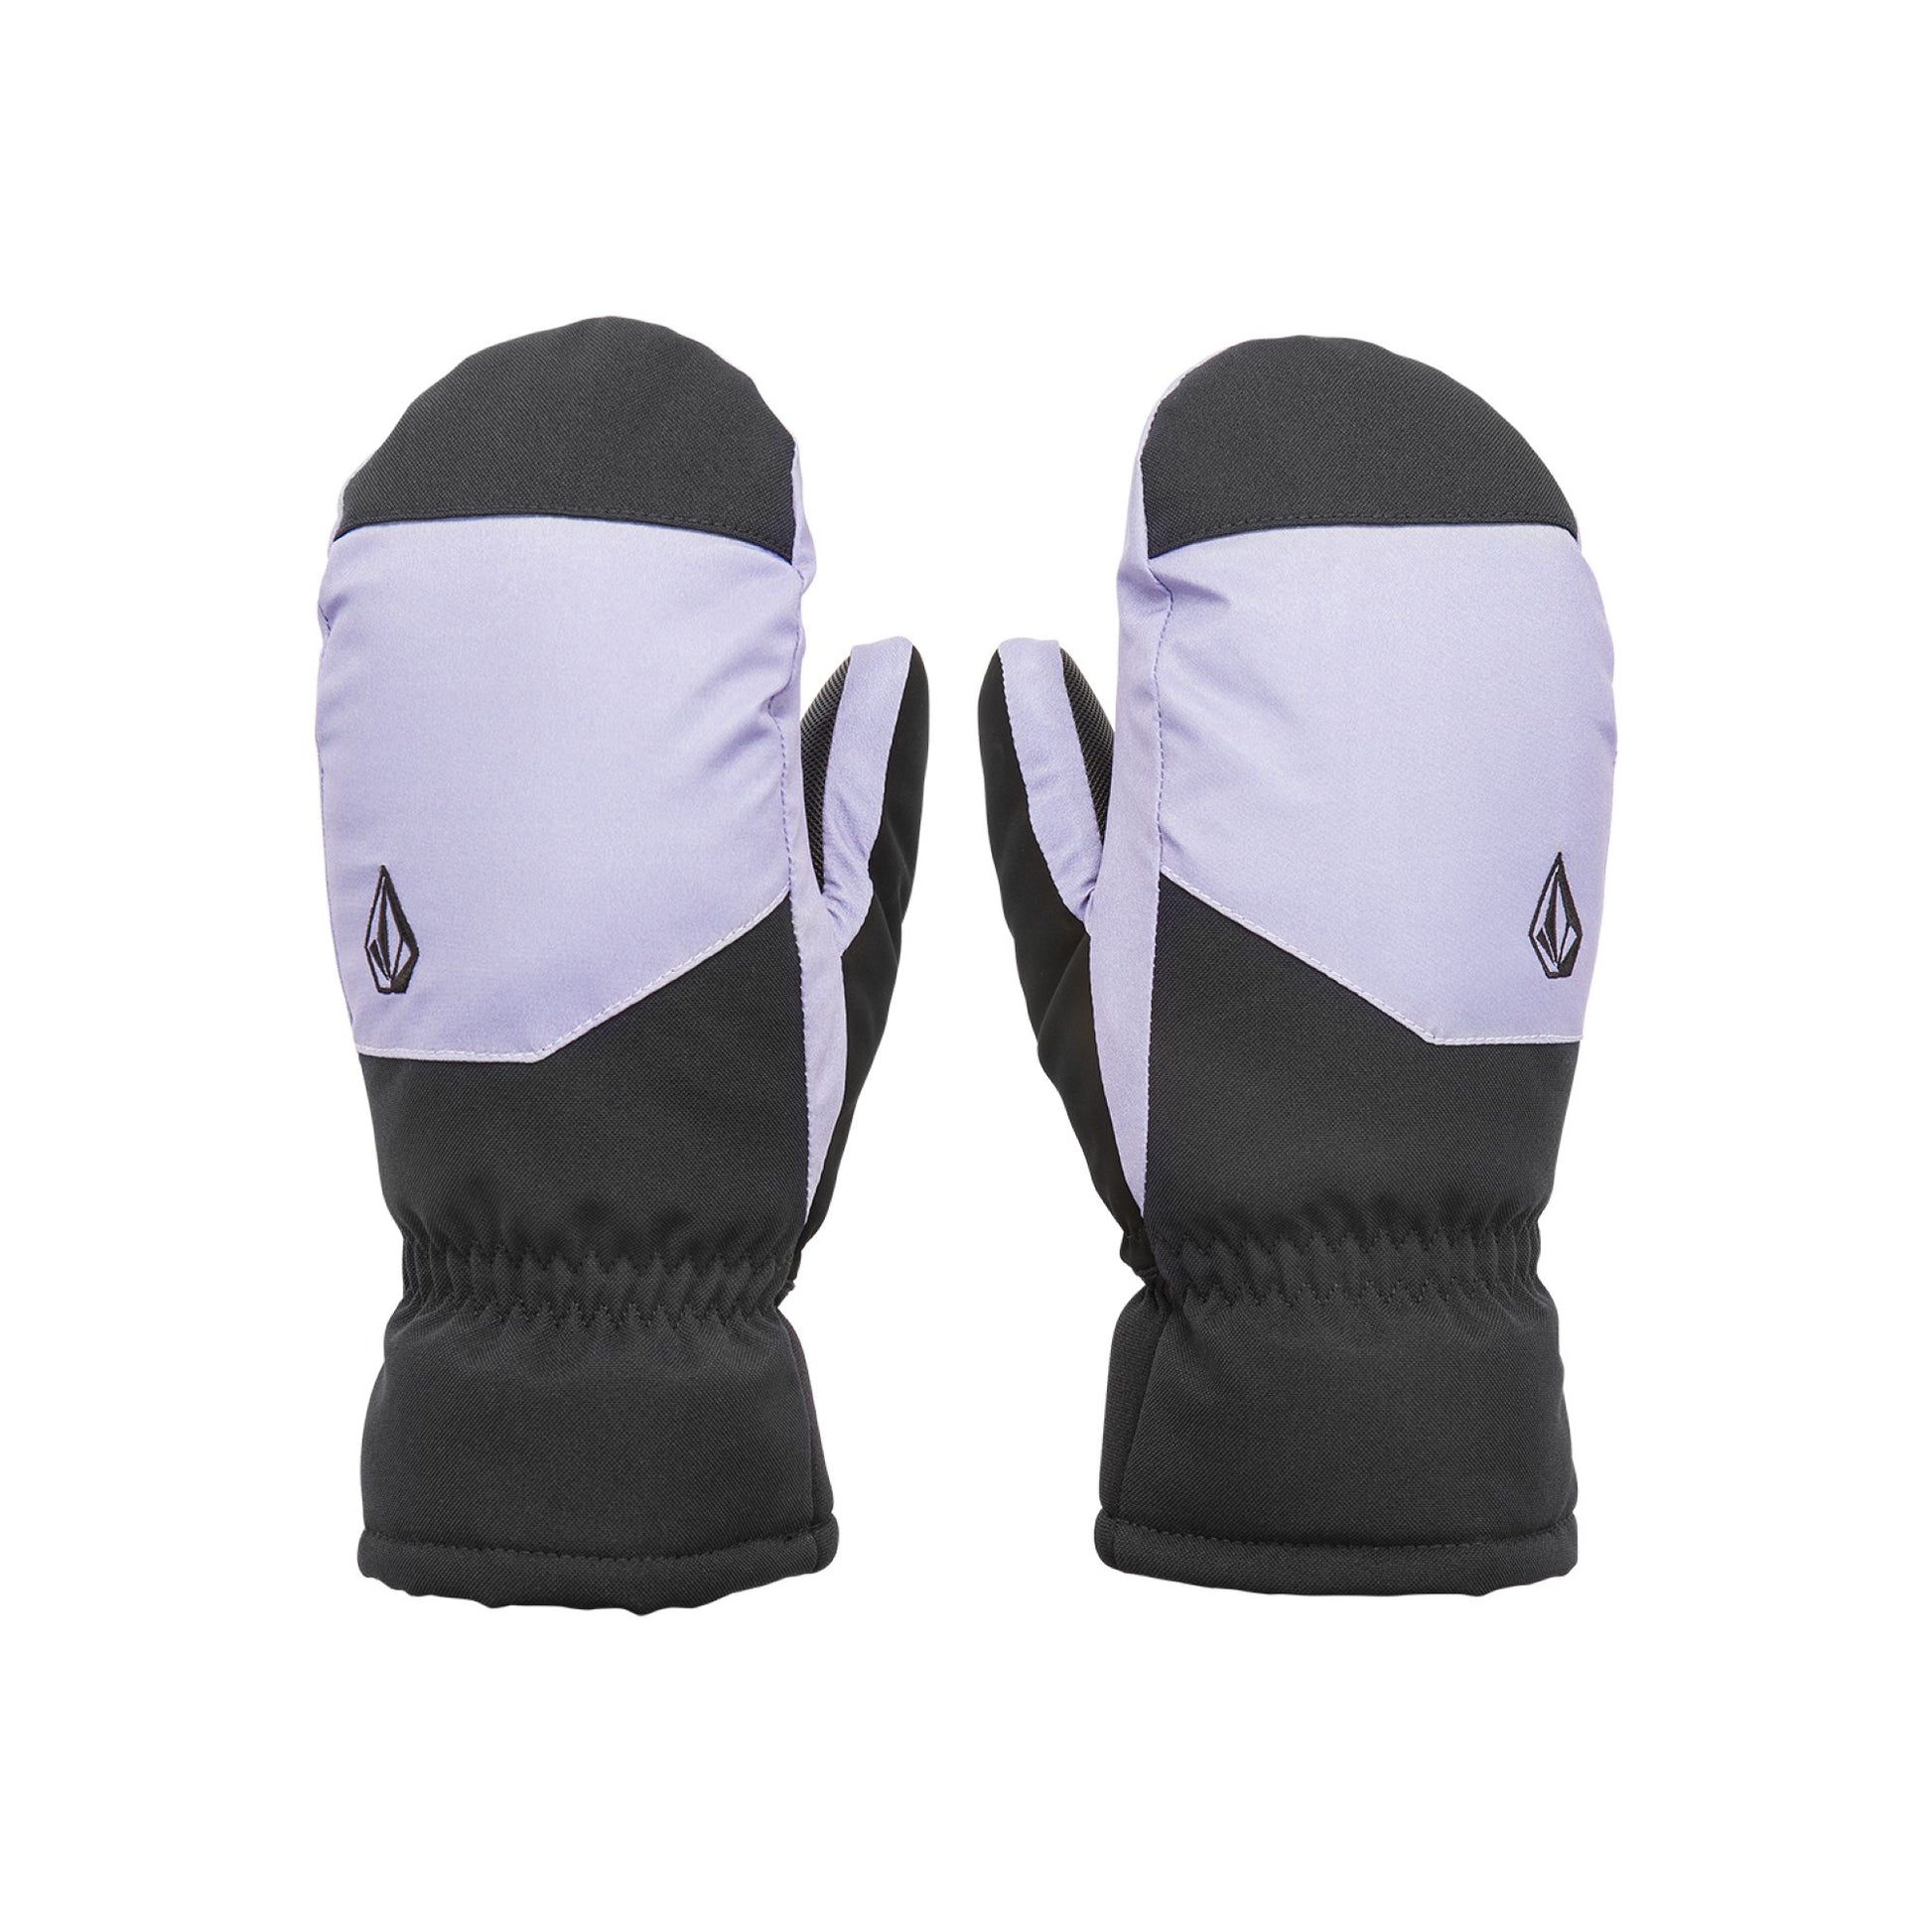 Volcom Women's Upland Mittens Lilac Ash Snow Mitts